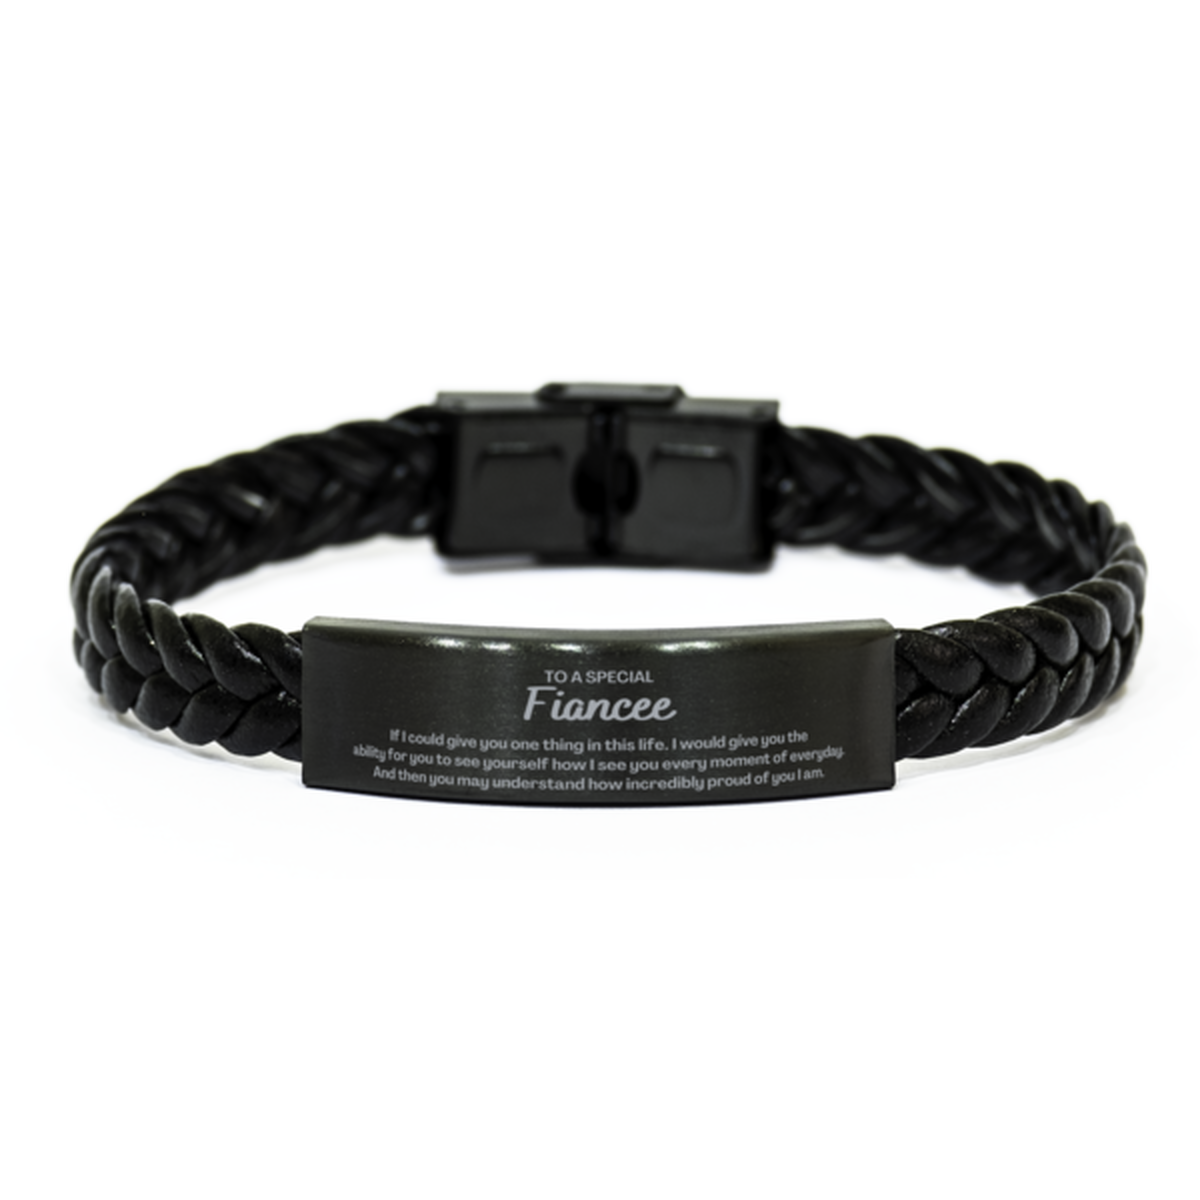 To My Fiancee Braided Leather Bracelet, Gifts For Fiancee Engraved, Inspirational Gifts for Christmas Birthday, Epic Gifts for Fiancee To A Special Fiancee how incredibly proud of you I am